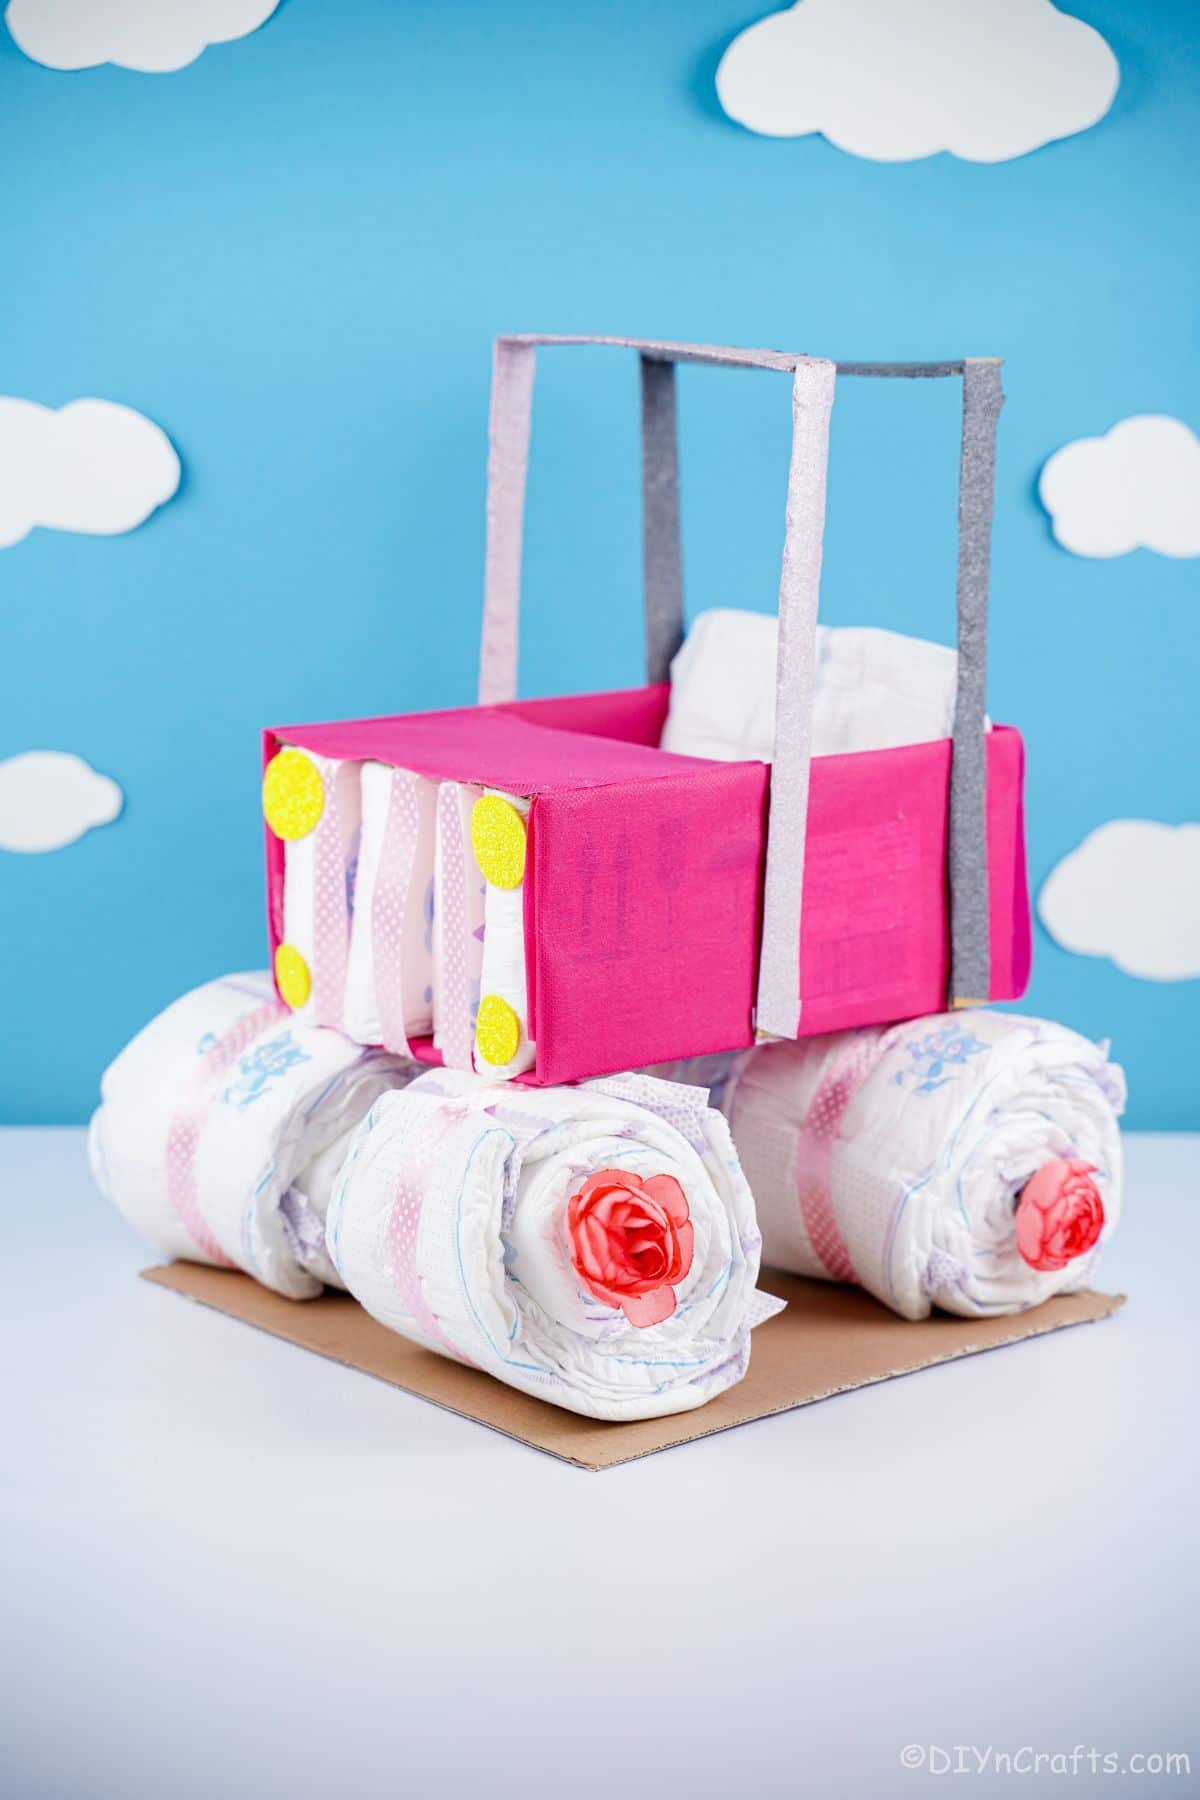 pink safari car diaper cake on white table with blue cloudy background